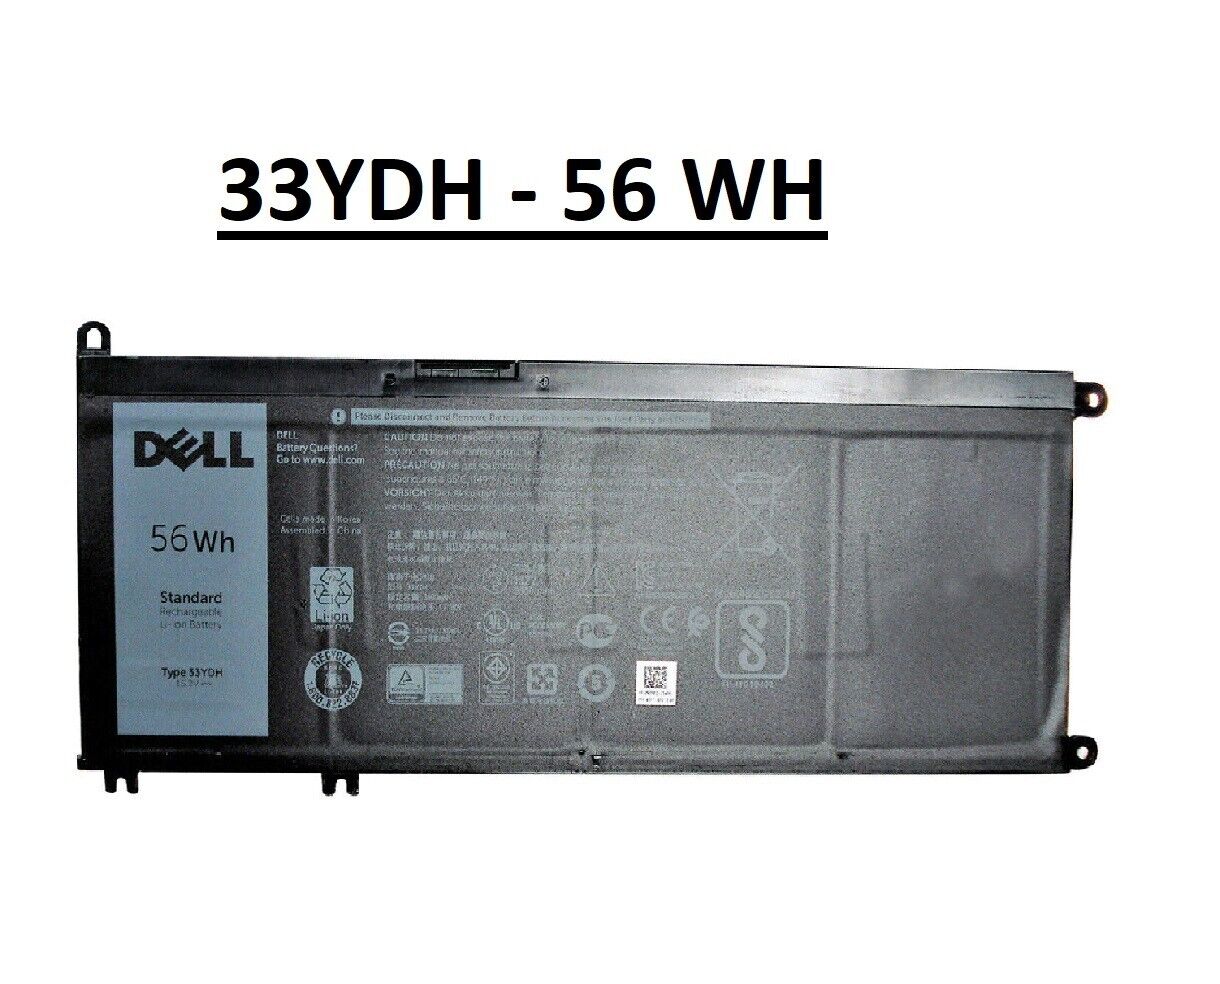 Dell 33YDH 033YDH 4-Cells 56Wh Laptop Battery for Dell Inspiron 17 7778 7779